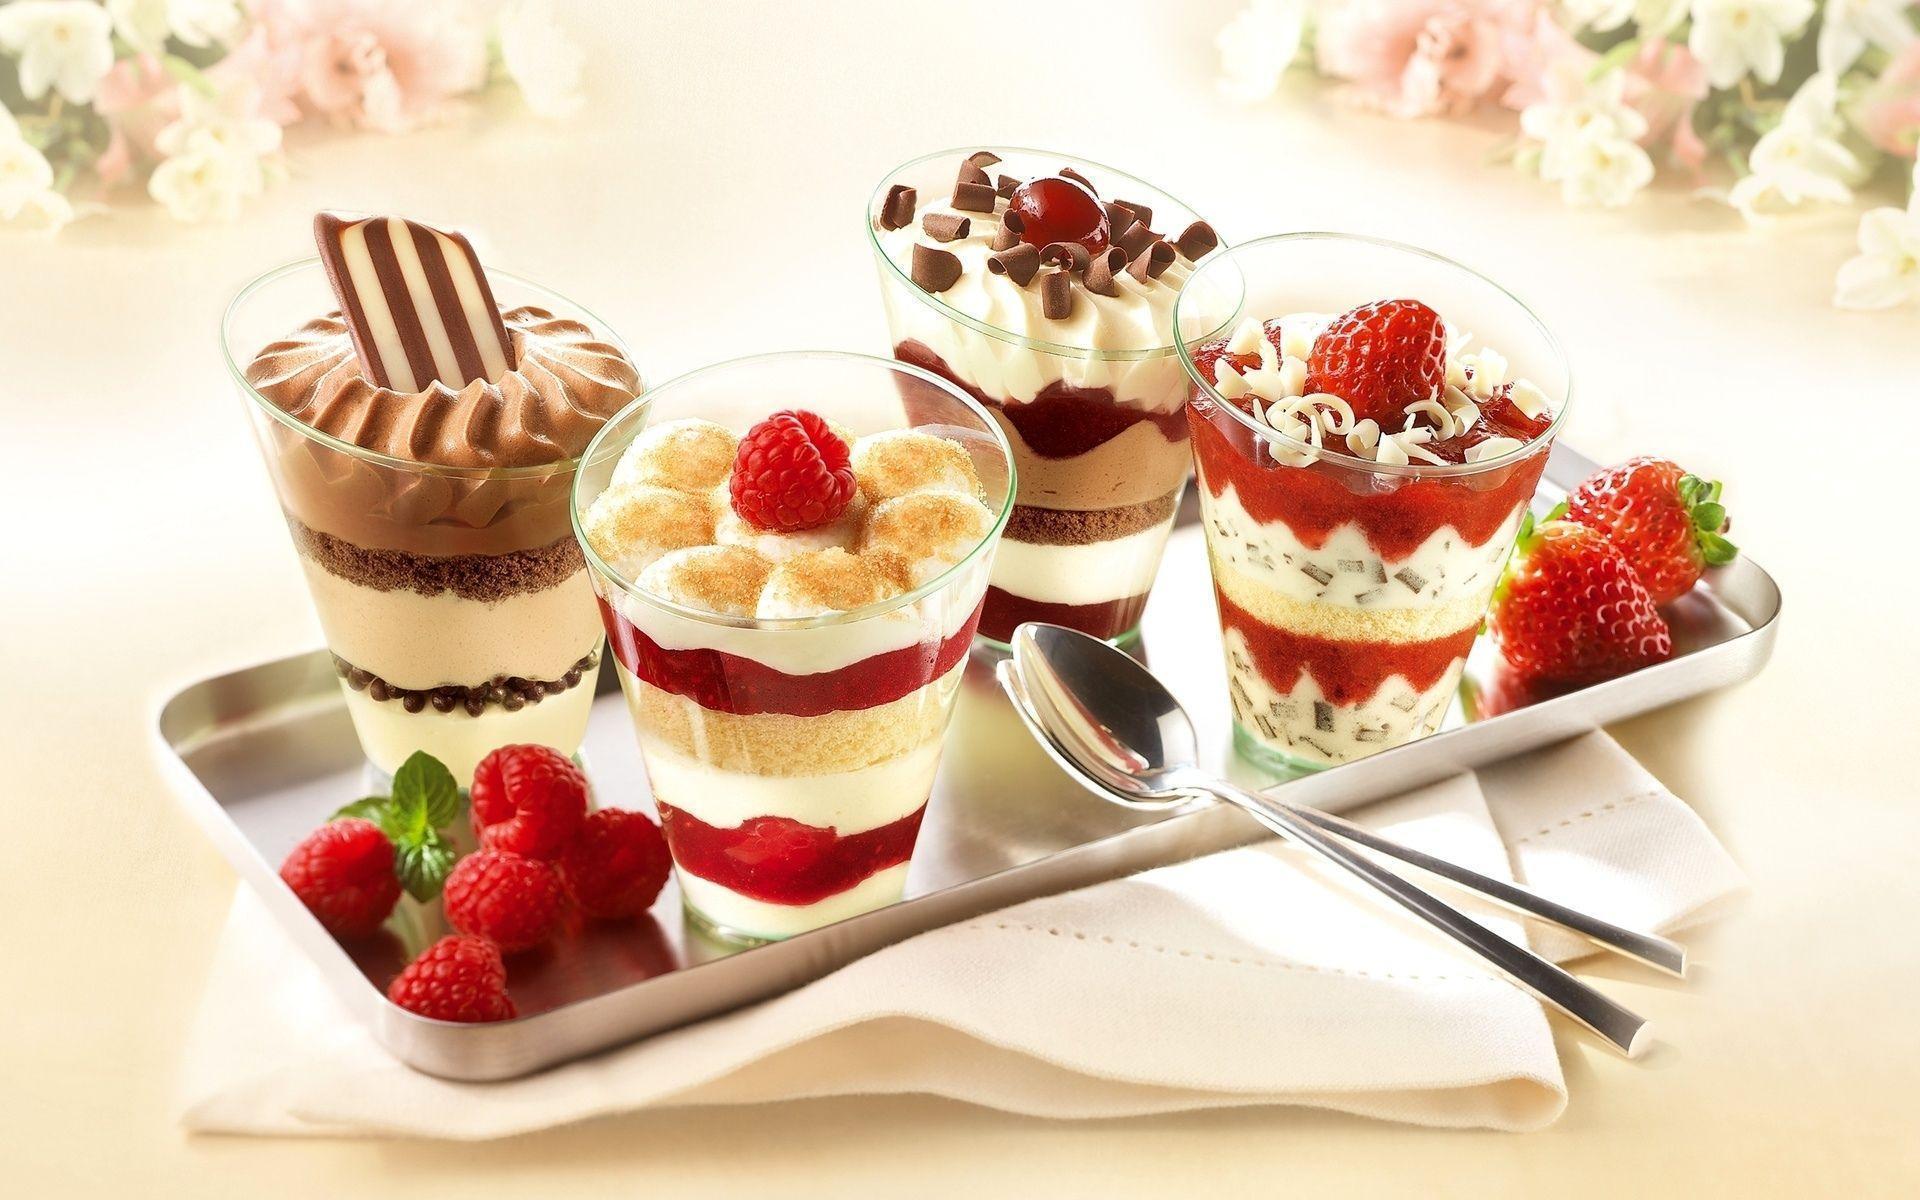 Desserts Wallpapers